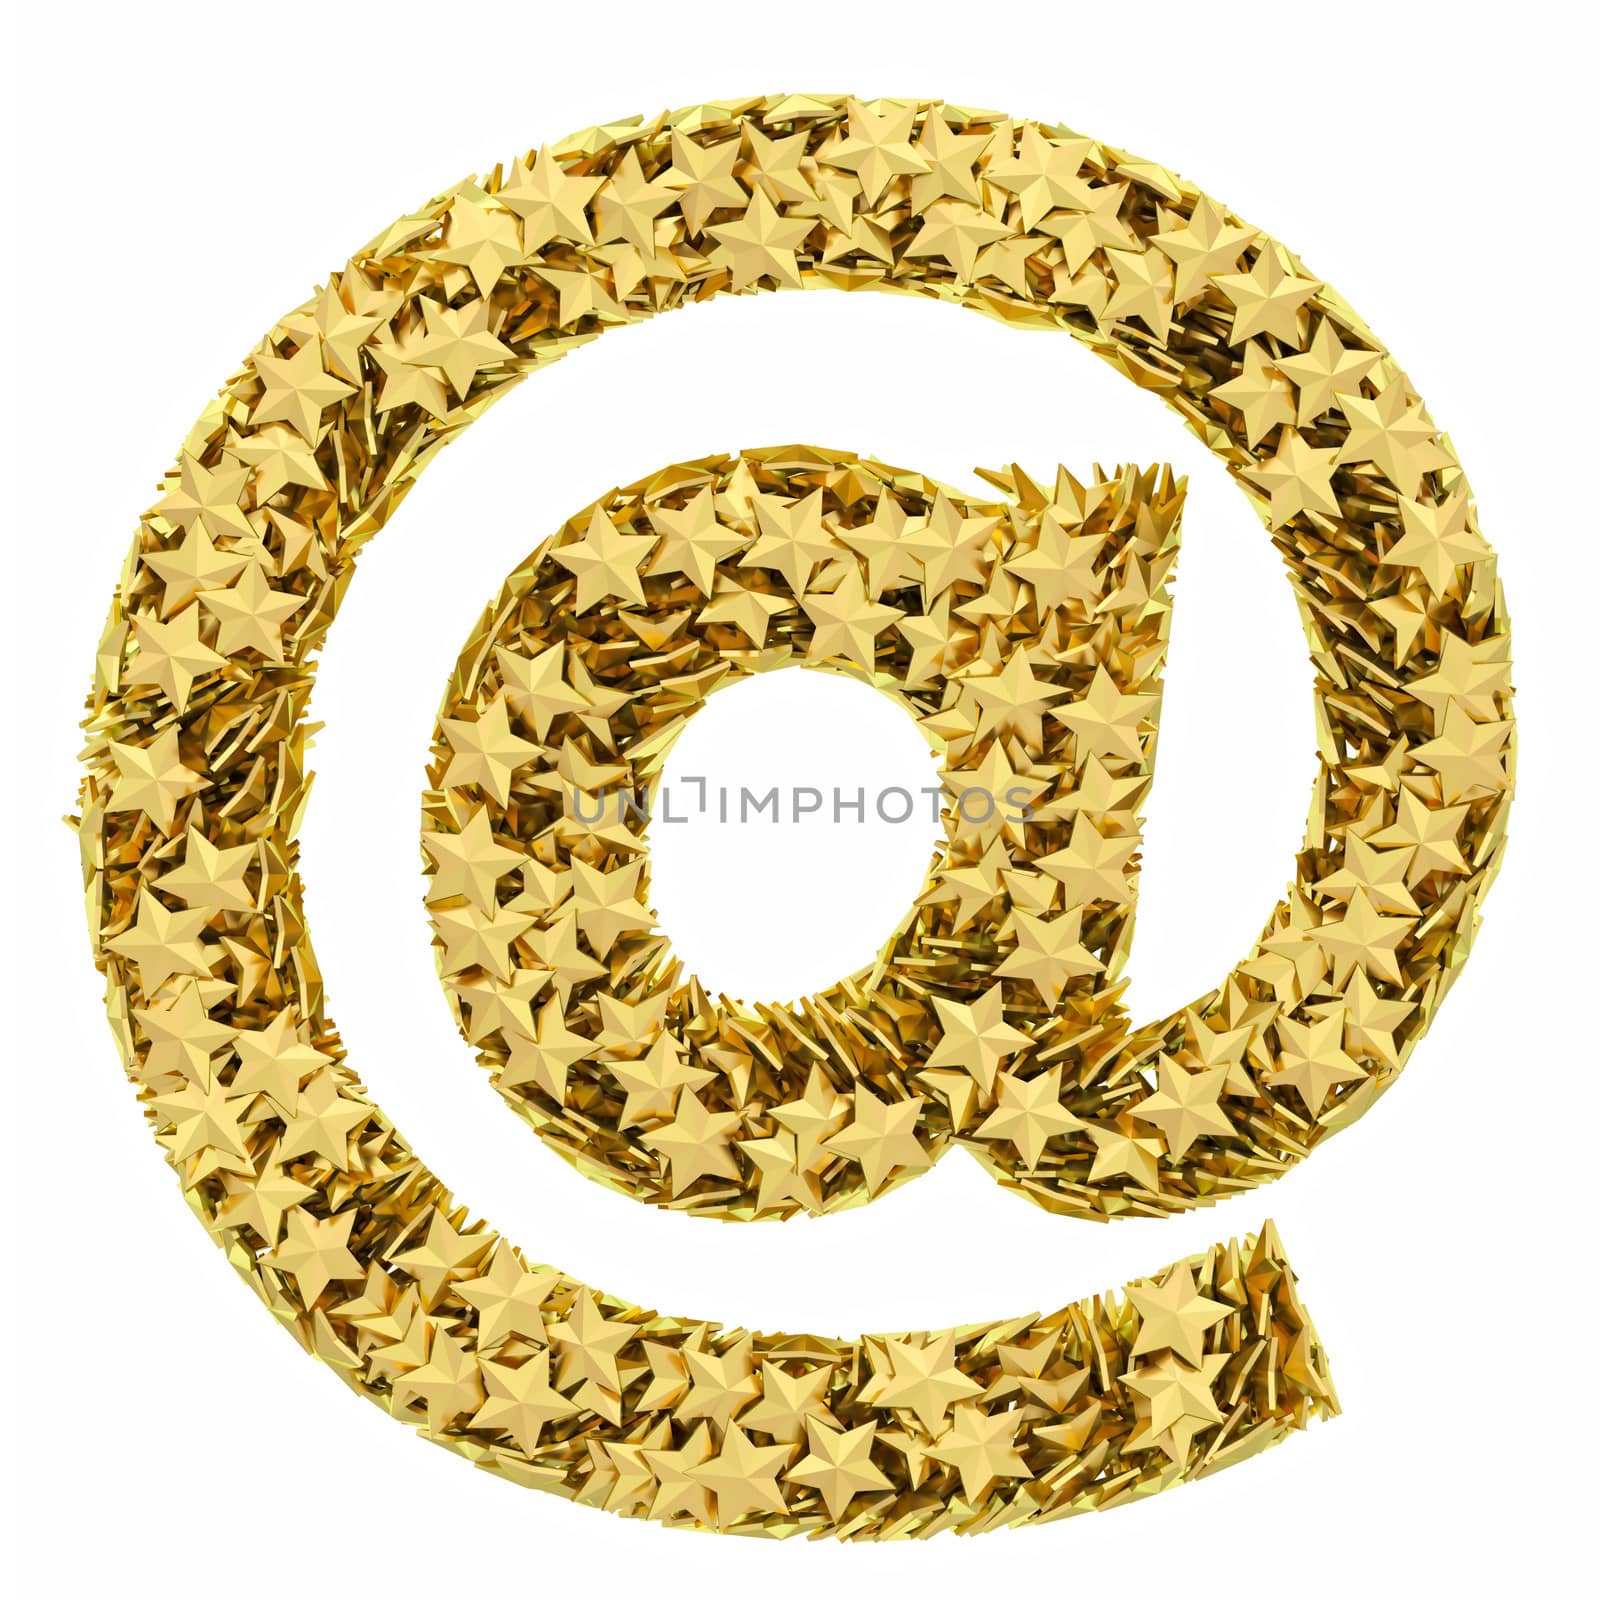 At or email sign composed of golden stars isolated on white. High resolution 3D image